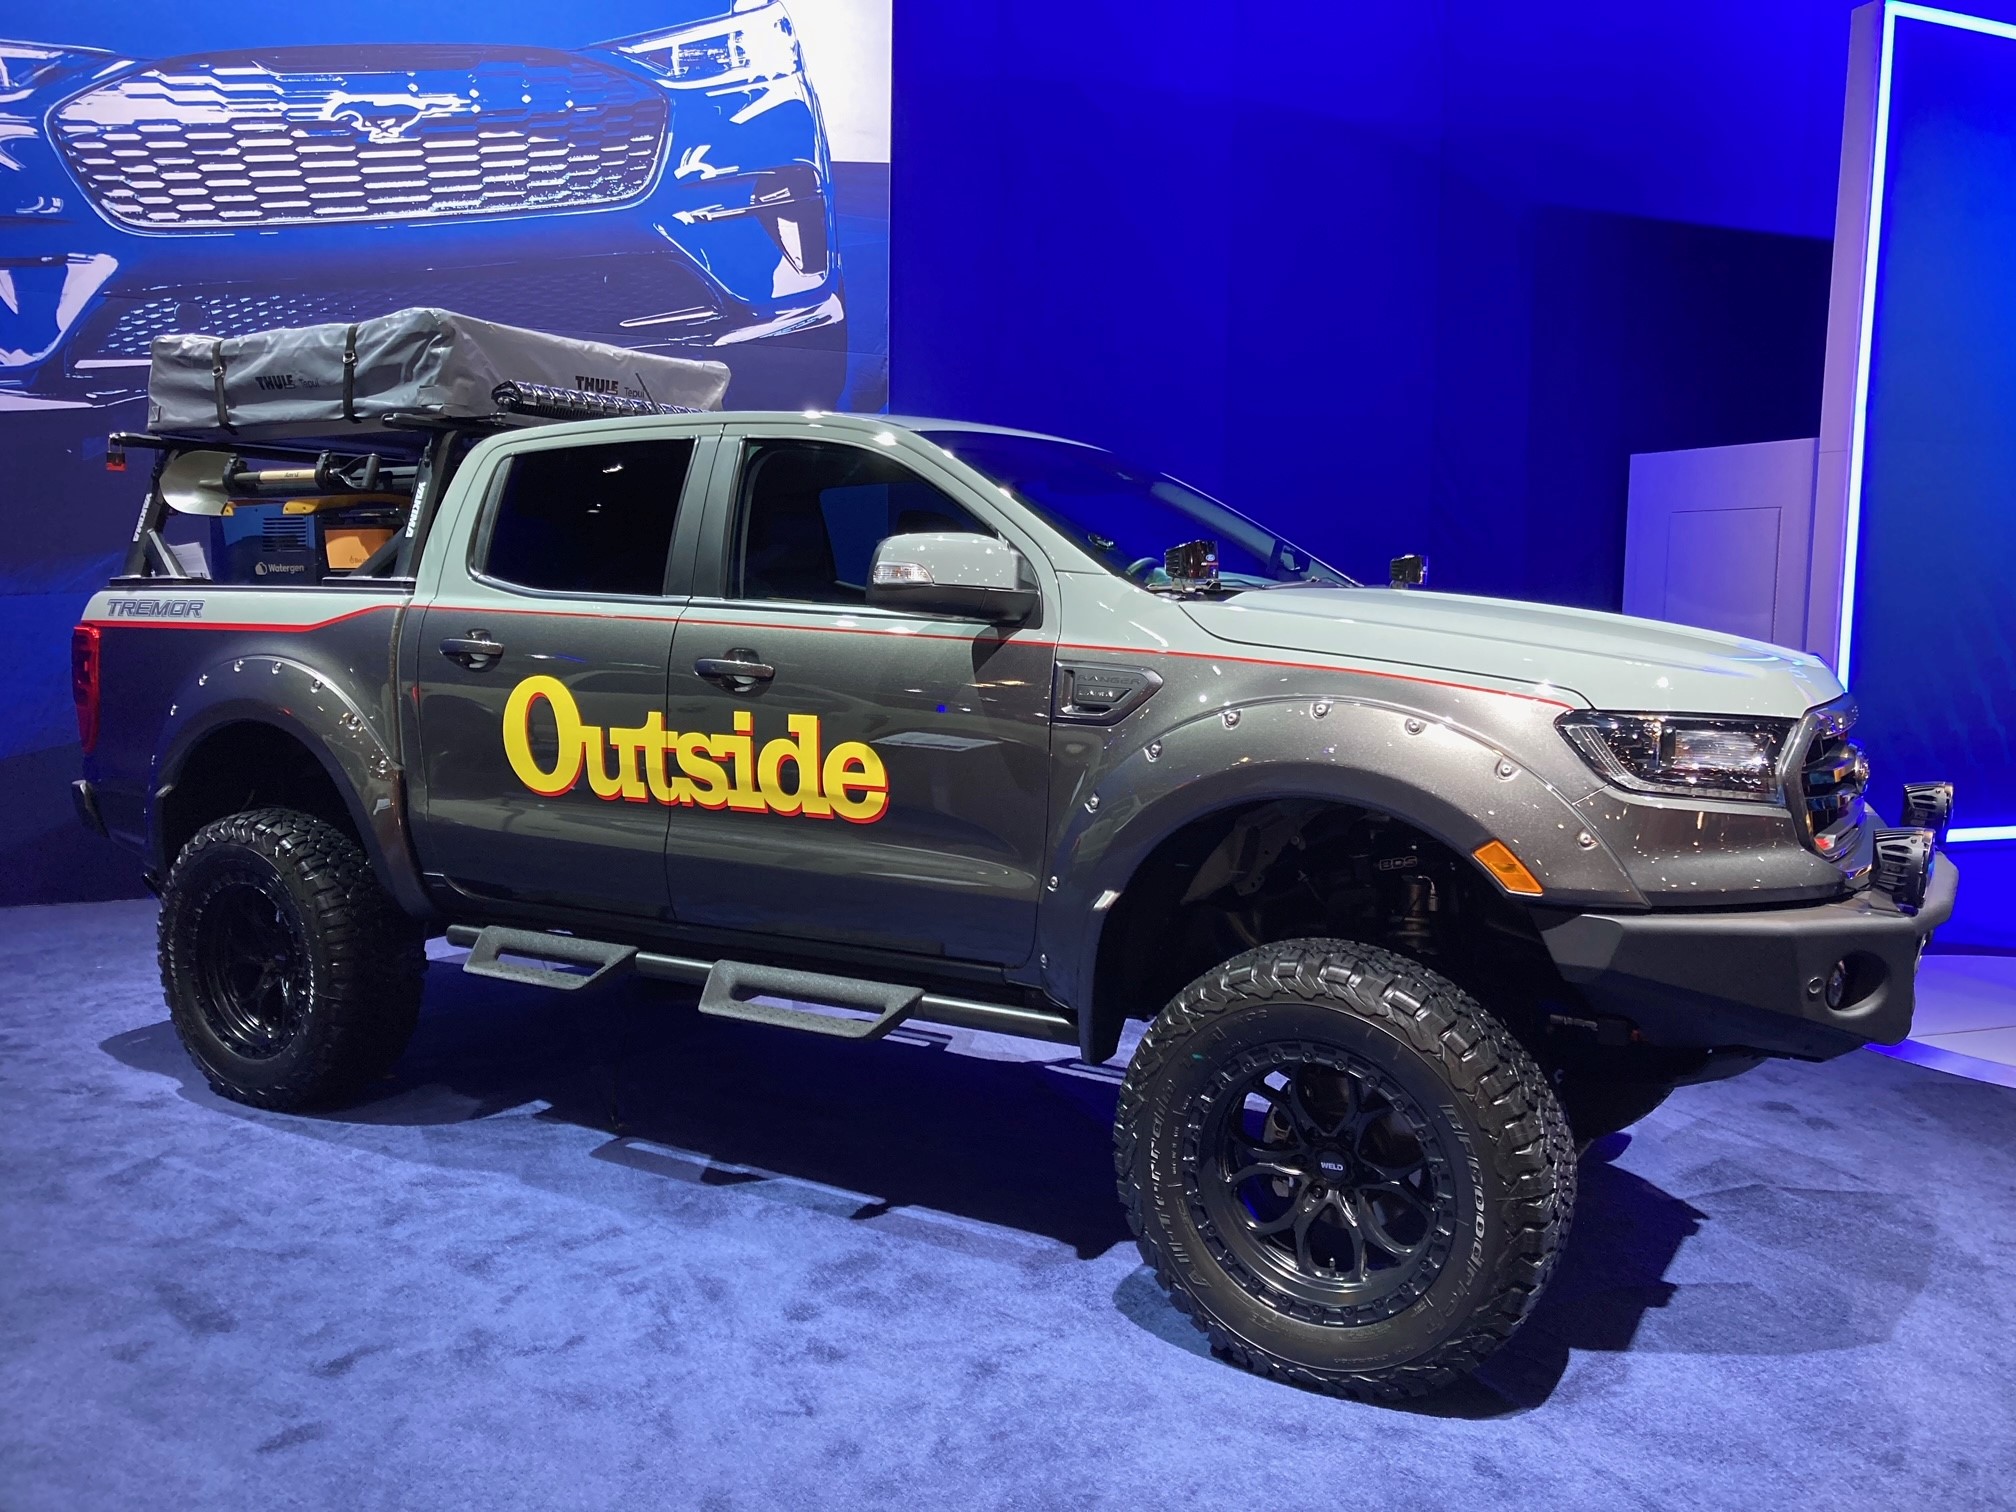 Midwest-Based Builders Team with Outside Magazine on Adventure Truck | THE SHOP